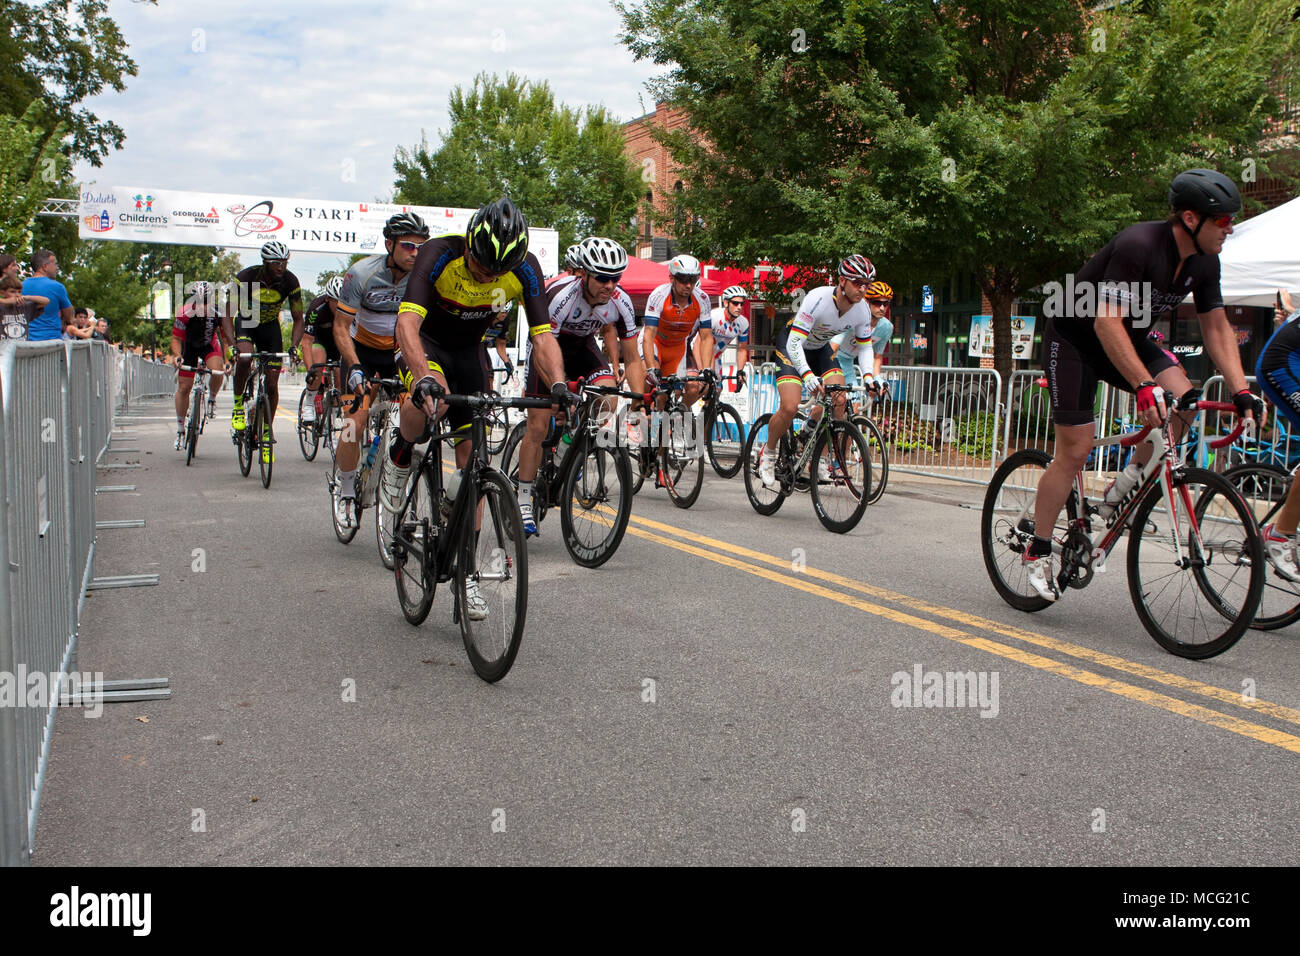 Duluth, GA, USA - August 2, 2014:  A group of cyclists sprint from the starting line as they compete in the Georgia Cup Criterium event. Stock Photo